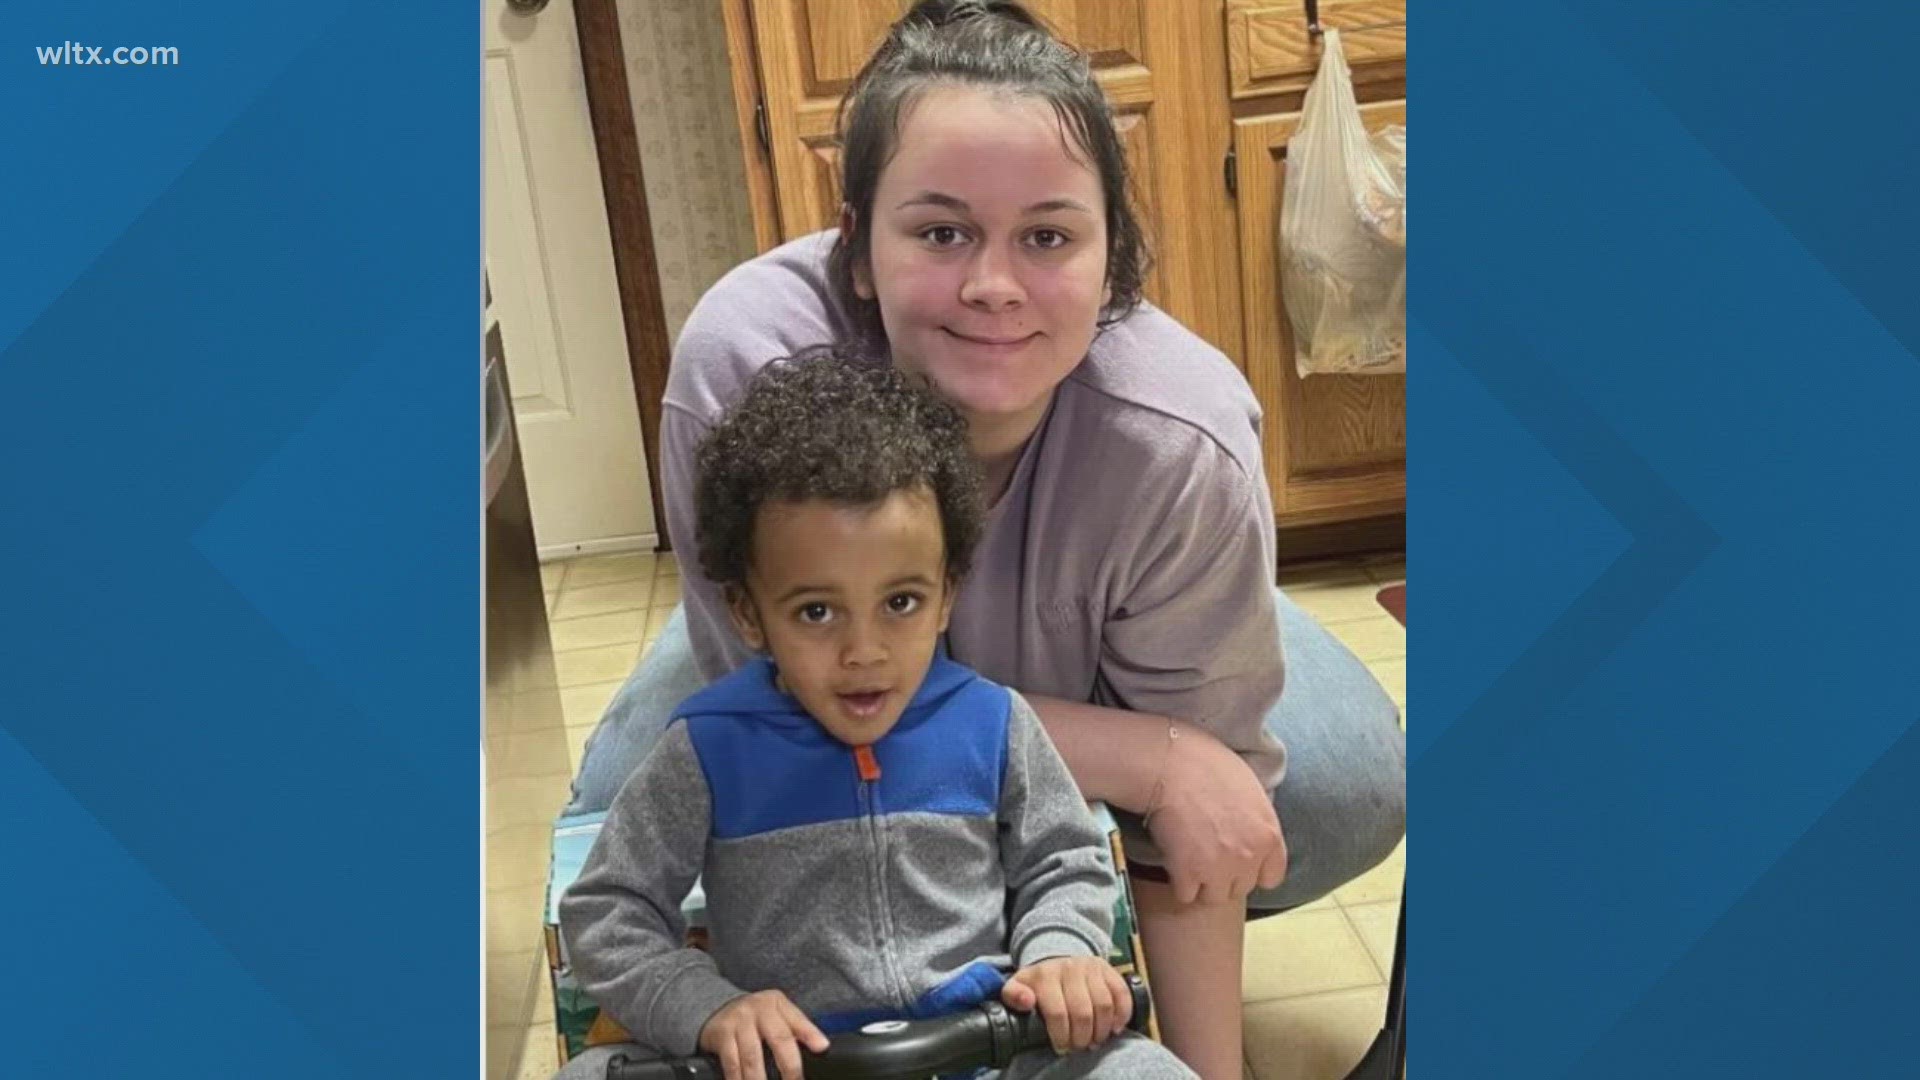 Sophia Van Dam, 20, and her 2-year-old son Matteo were reported missing in Sumter, South Carolina, in June 2023.